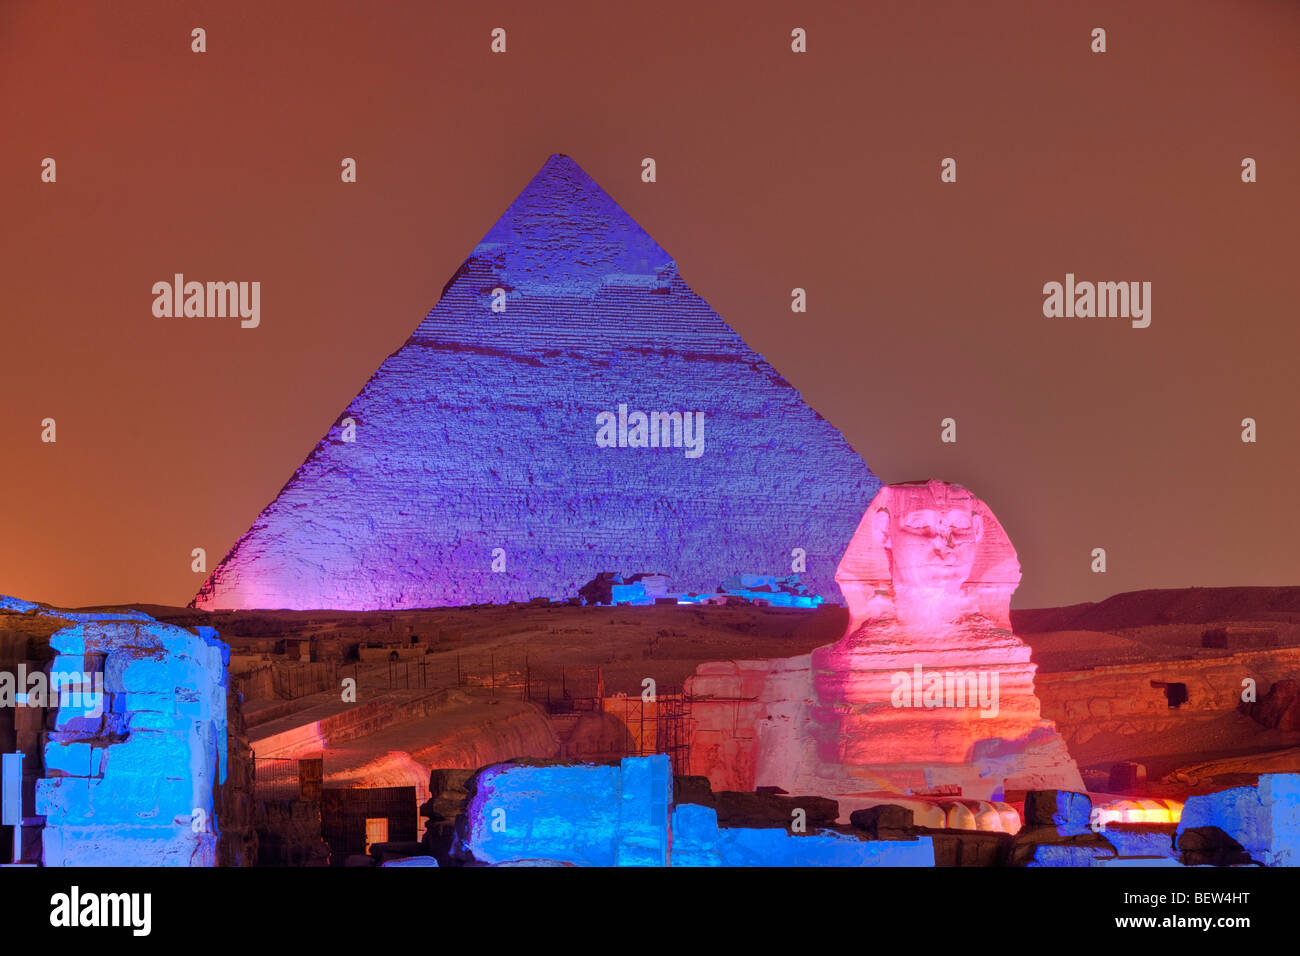 Light and Sound Show at Pyramids of Giza, Cairo, Egypt Stock Photo